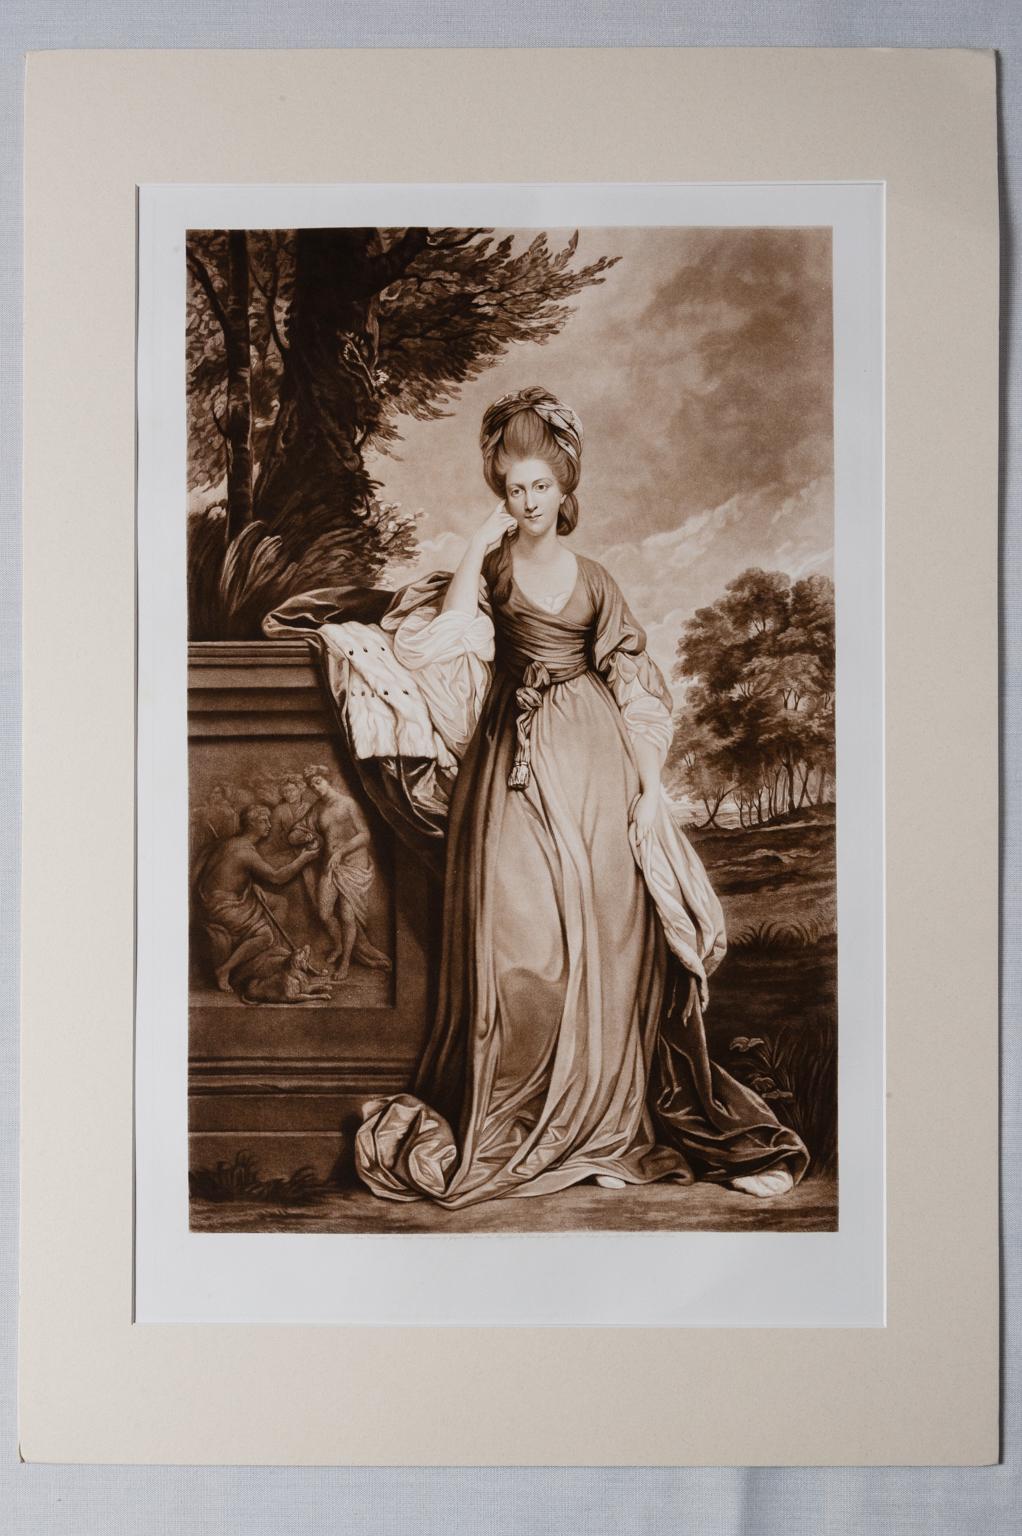 ST/628, antique large prints with portrait of two noblewomen: Anne, Duchess of Cumberland - reproduced by Goupil & Co. from the mezzotint by Thomas Watson, after Sir Joshua Reynolds 1907. Printed in Paris.
Anne, Viscountess Townshend, reproduced by